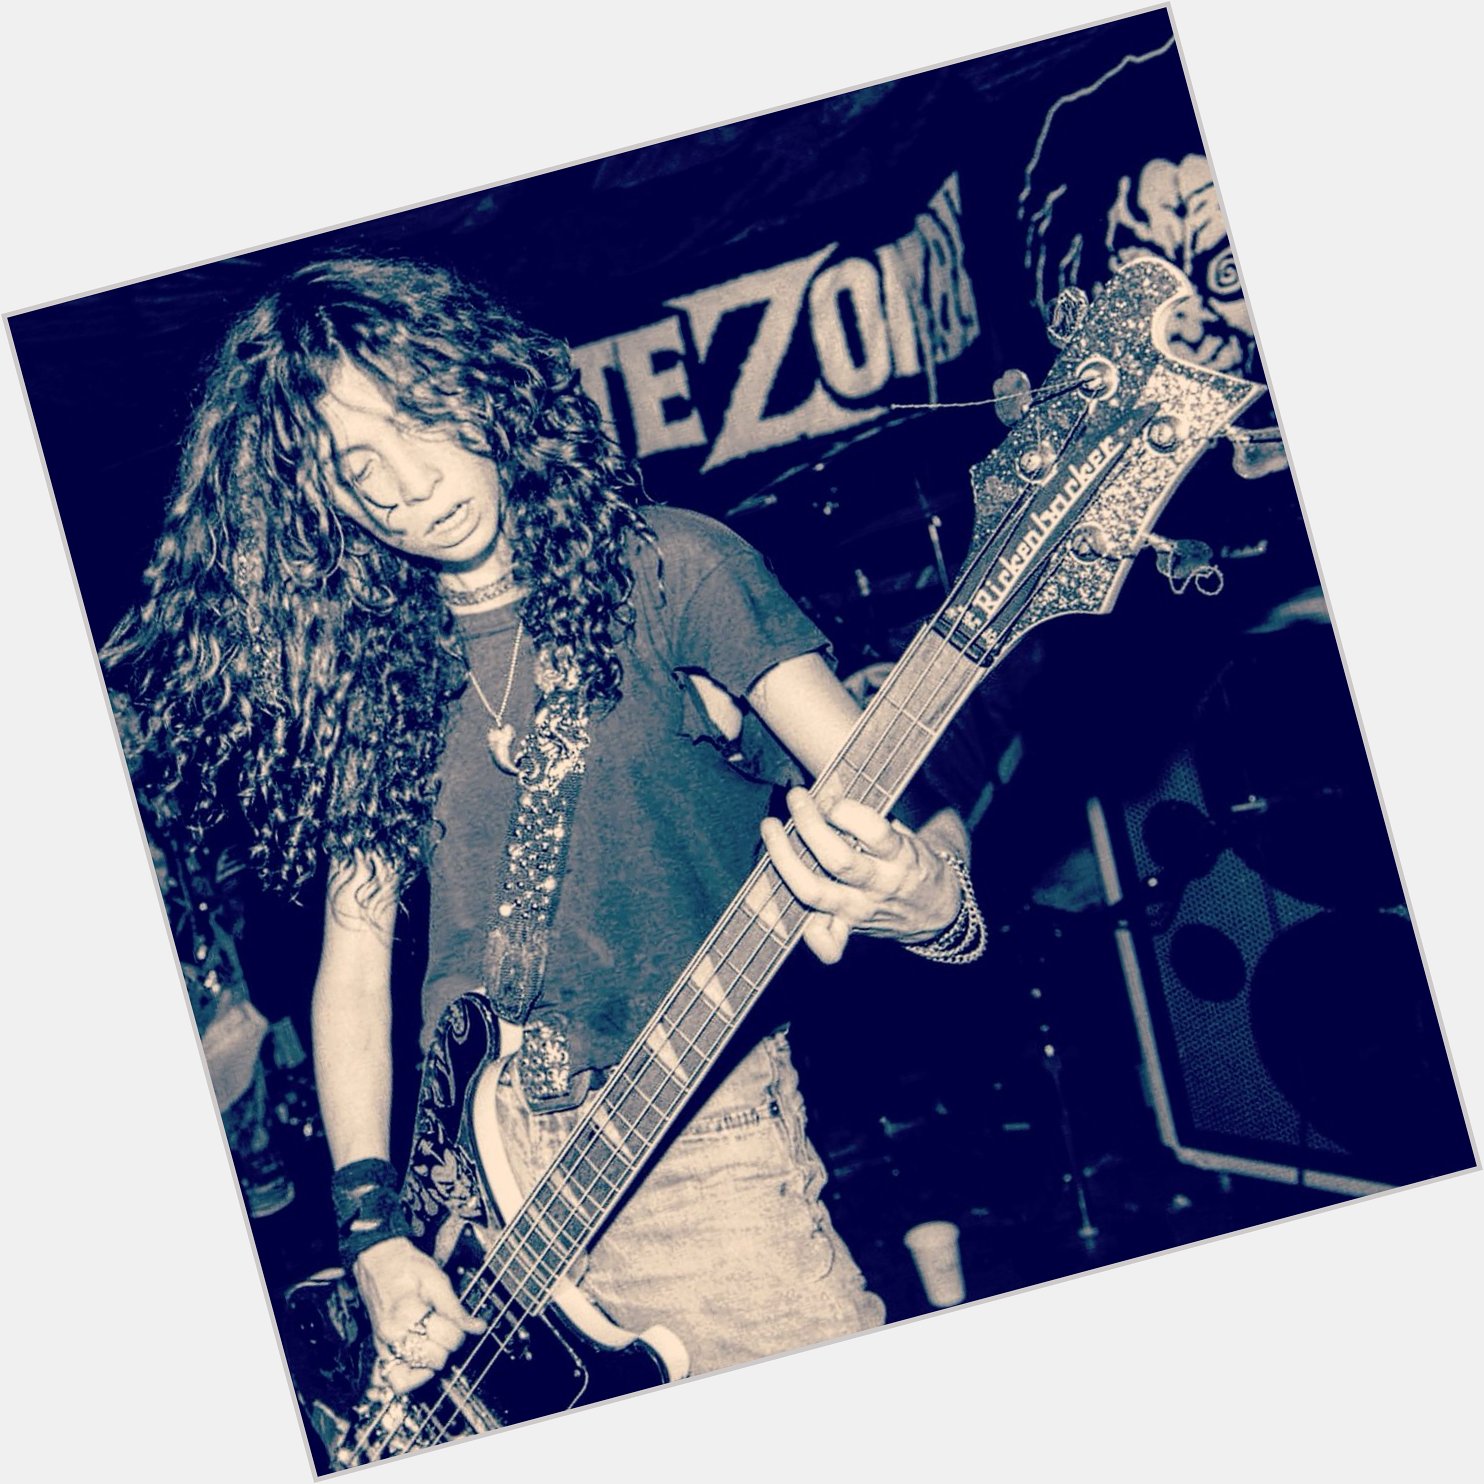 Happy 55th birthday to Sean Yseult of White Zombie, The Cramps, Famous Monsters, Rock City Morgue + Zilch! 